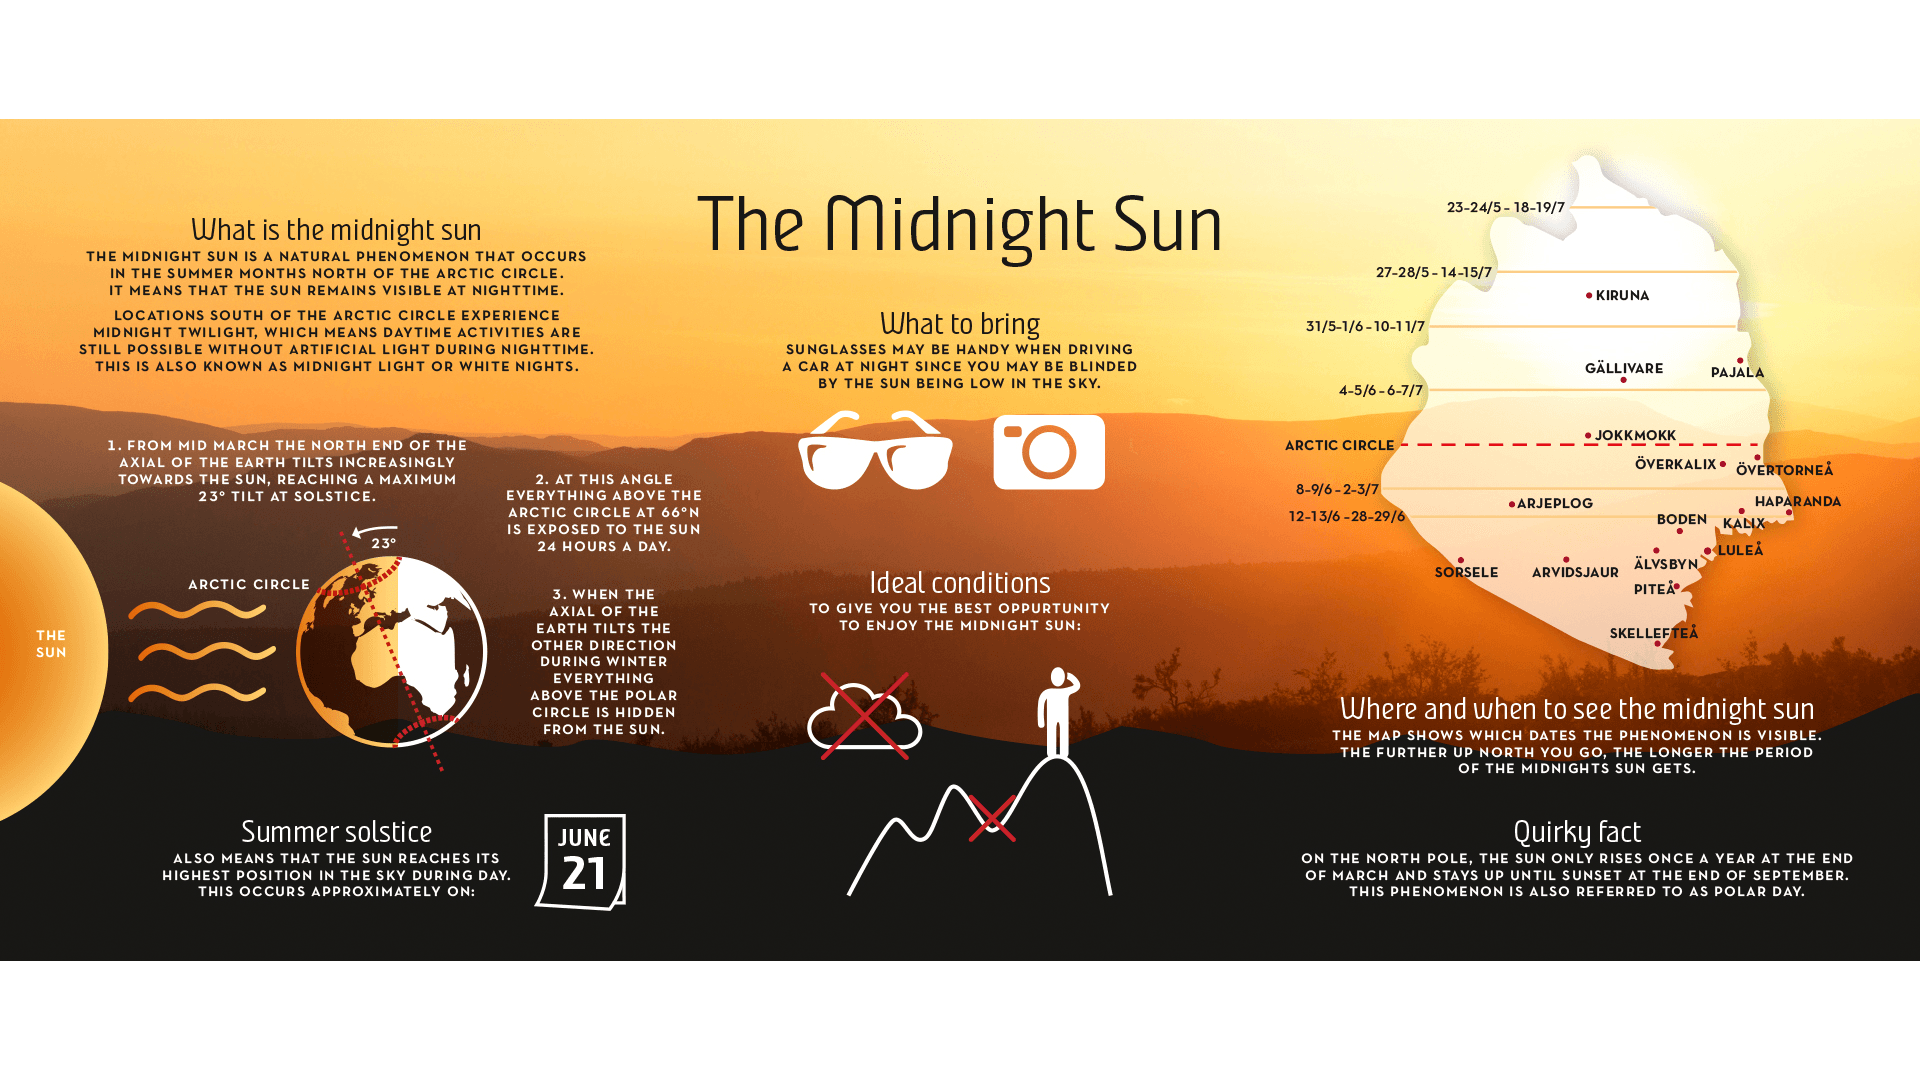 Things to Do Under the Midnight Sun